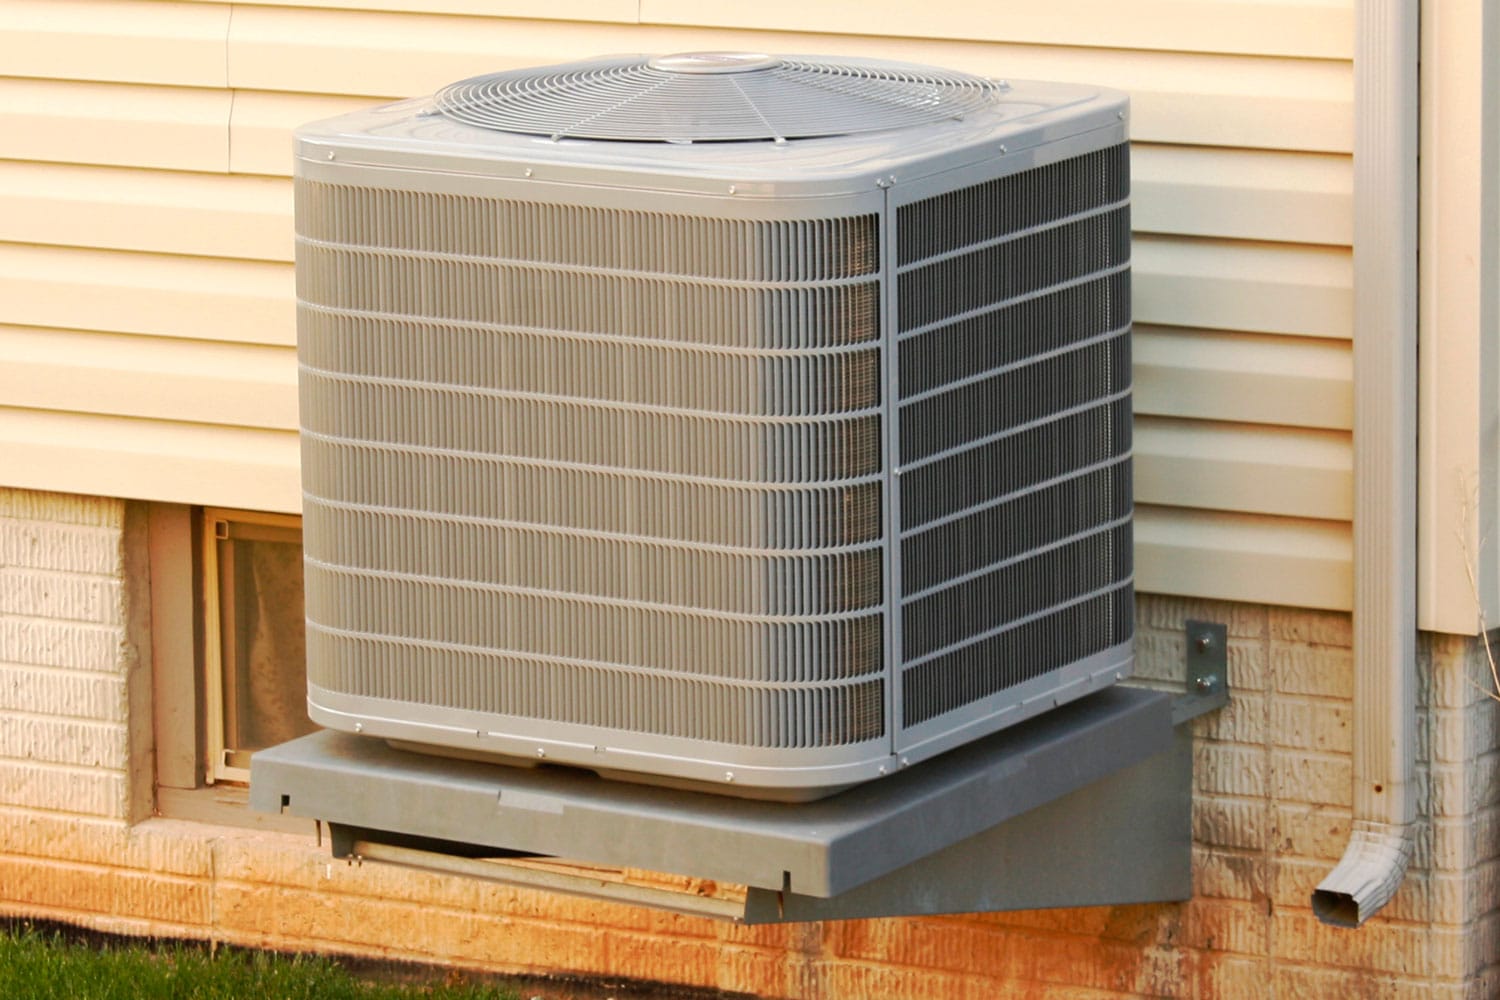 A small air conditioning unit mounted on an elevated stand